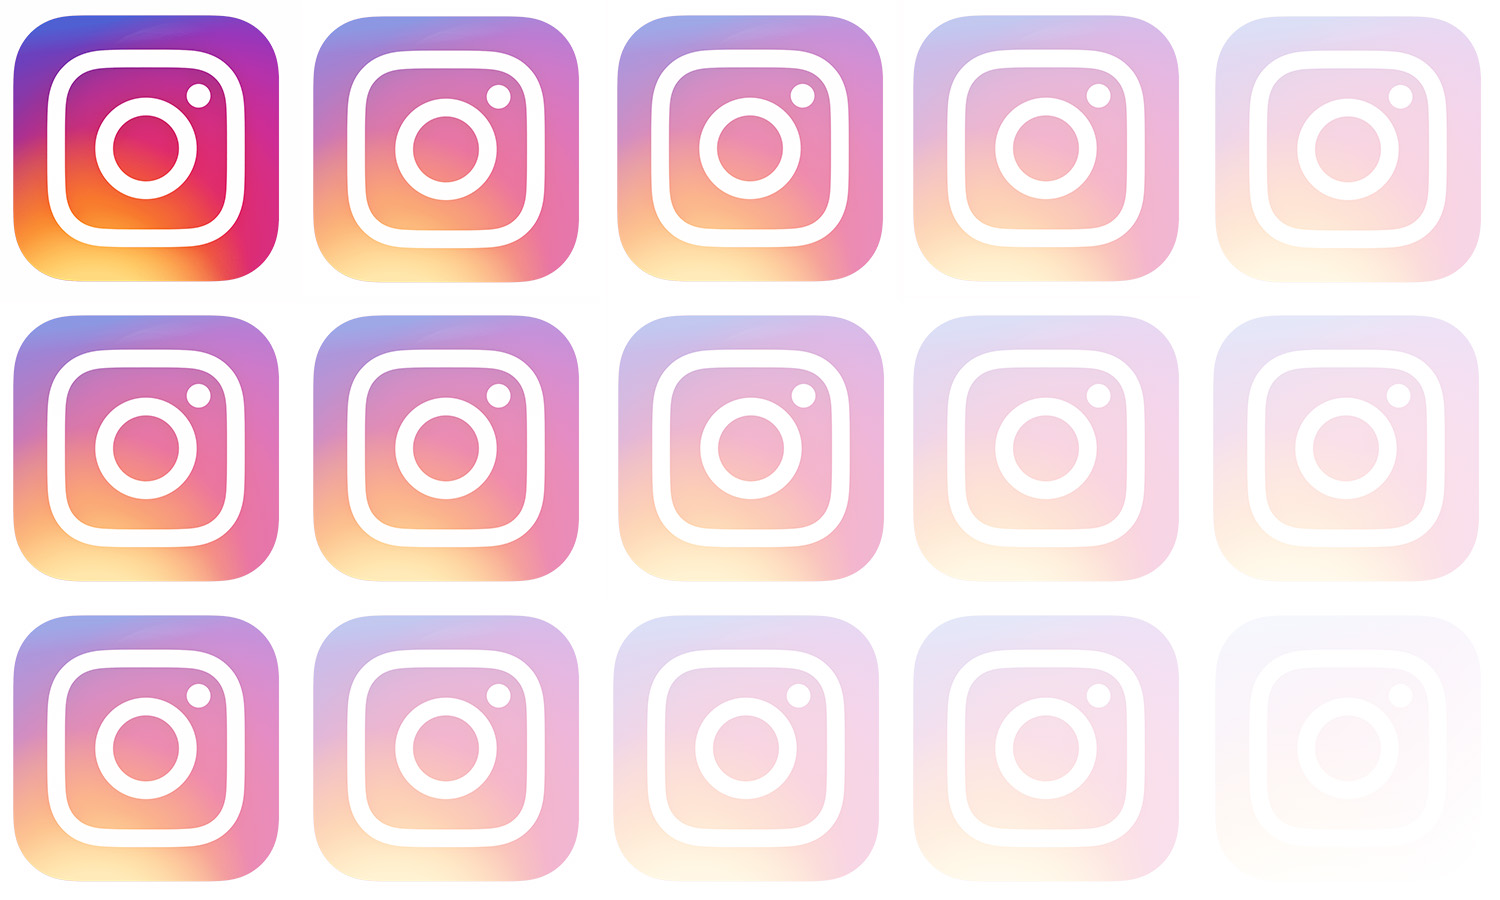 All Of My Instagram Photos Have Disappeared. What Now?